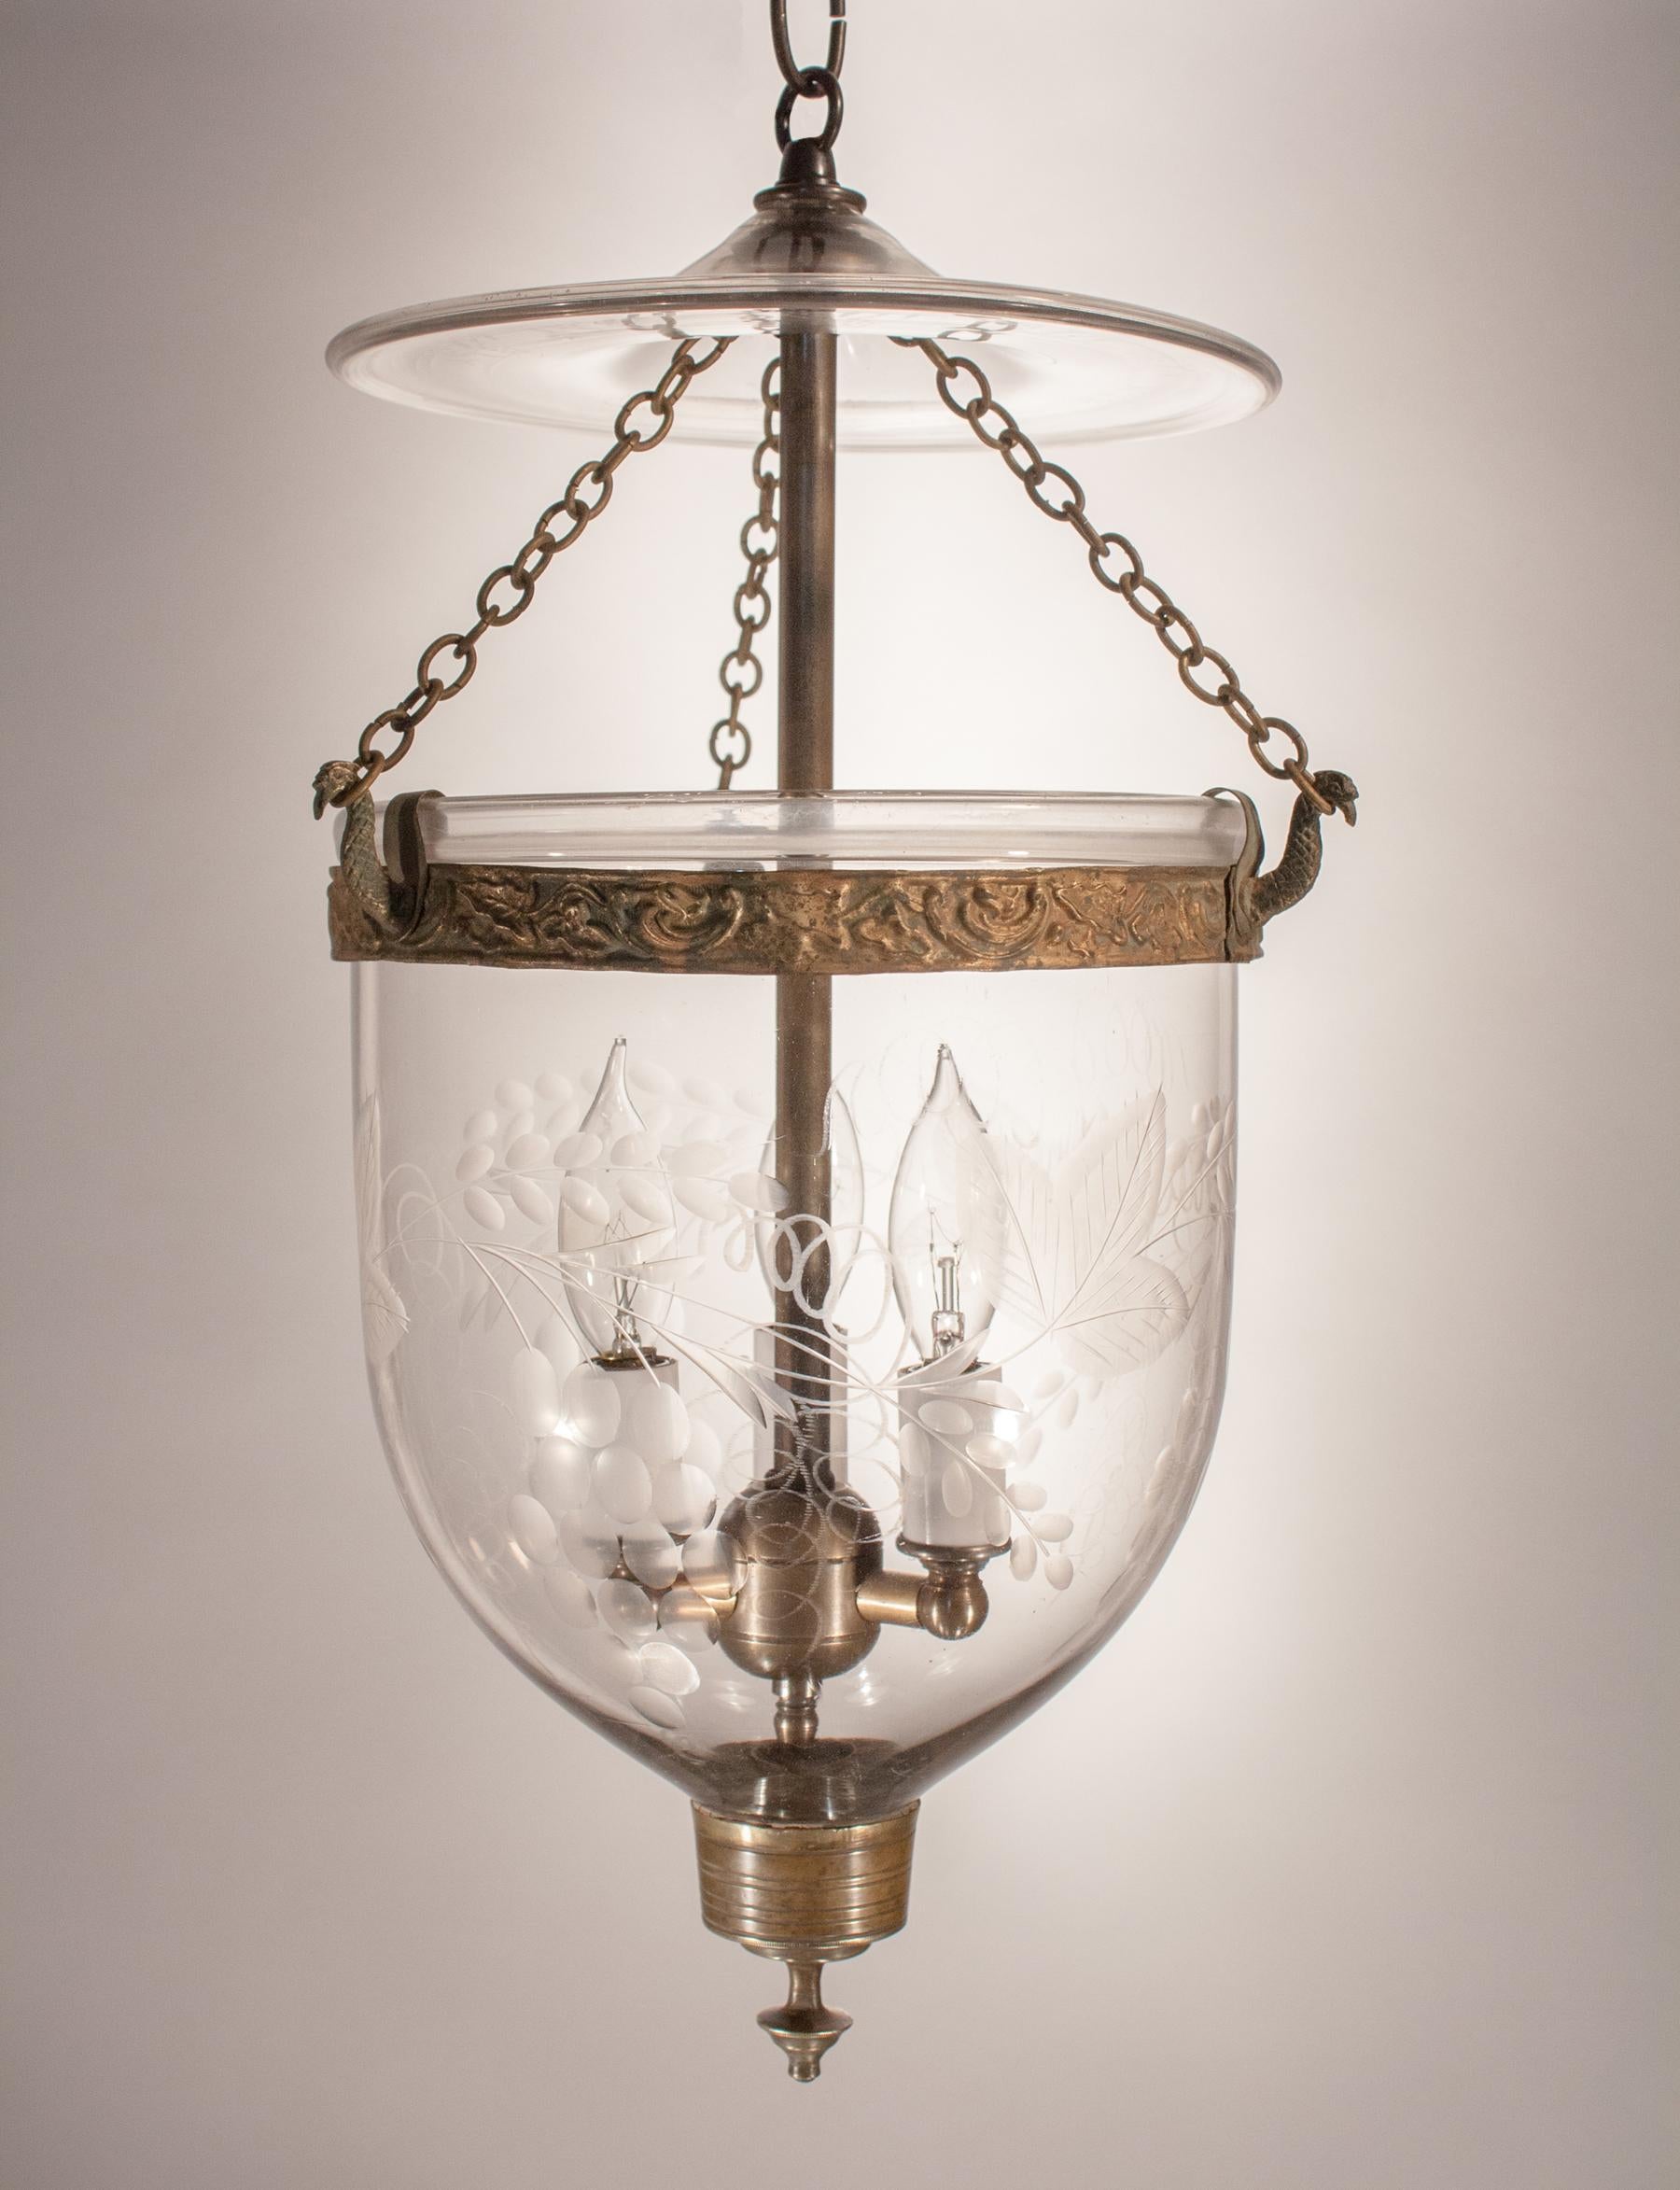 A charming 19th century bell jar lantern with etched grape and leaf motif. This circa 1880 petite pendant features a period embossed brass band and finial candleholder base. The quality of the hand blown glass is excellent, with desirable swirls in